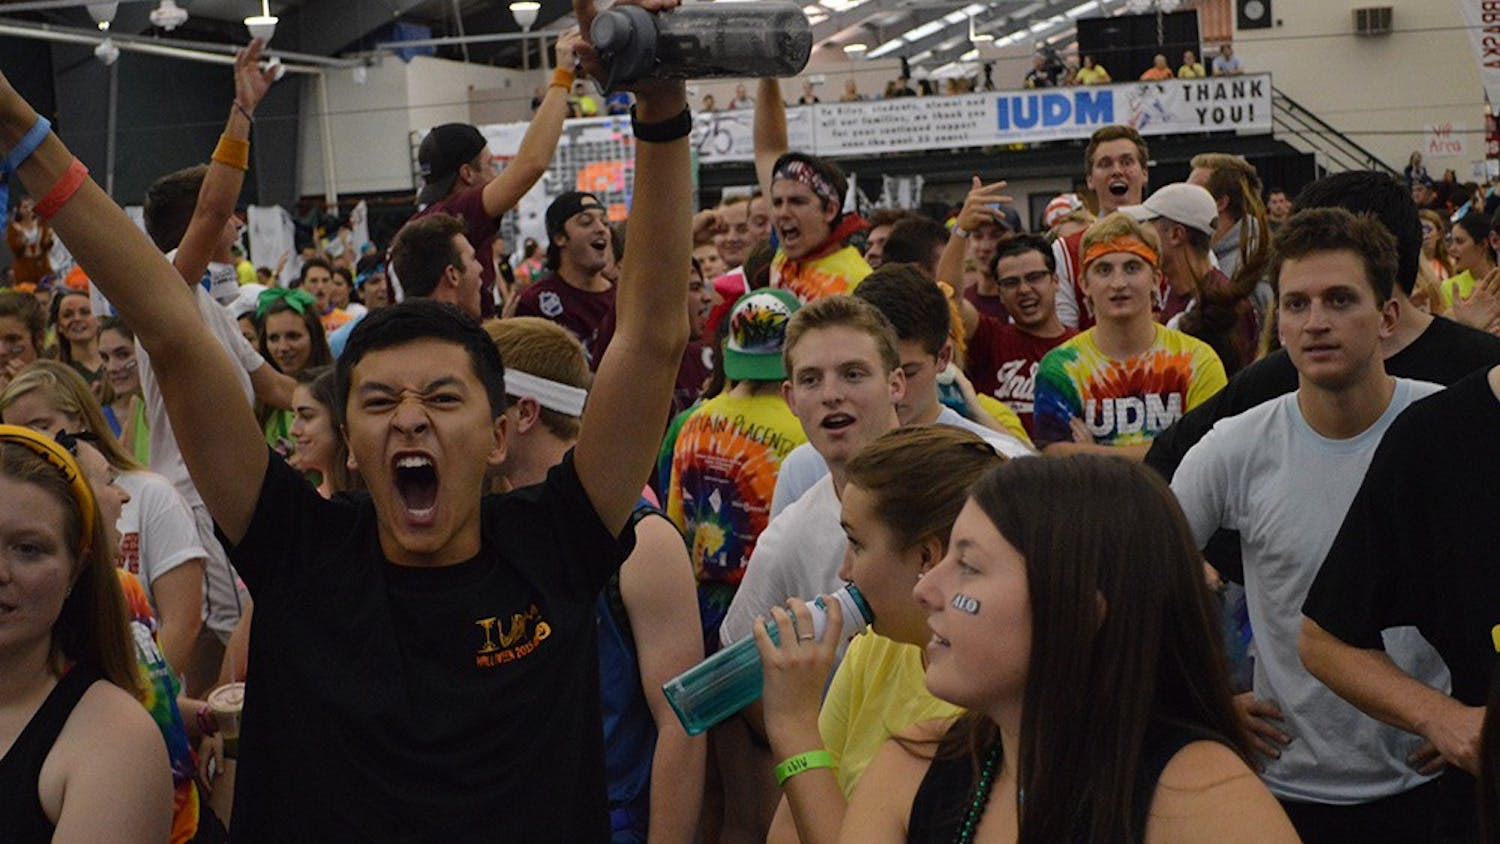 Sophomore Jaeson Chang screams after donations were made during the Indiana University Dance Marathon Saturday evening at the IU Tennis Center.